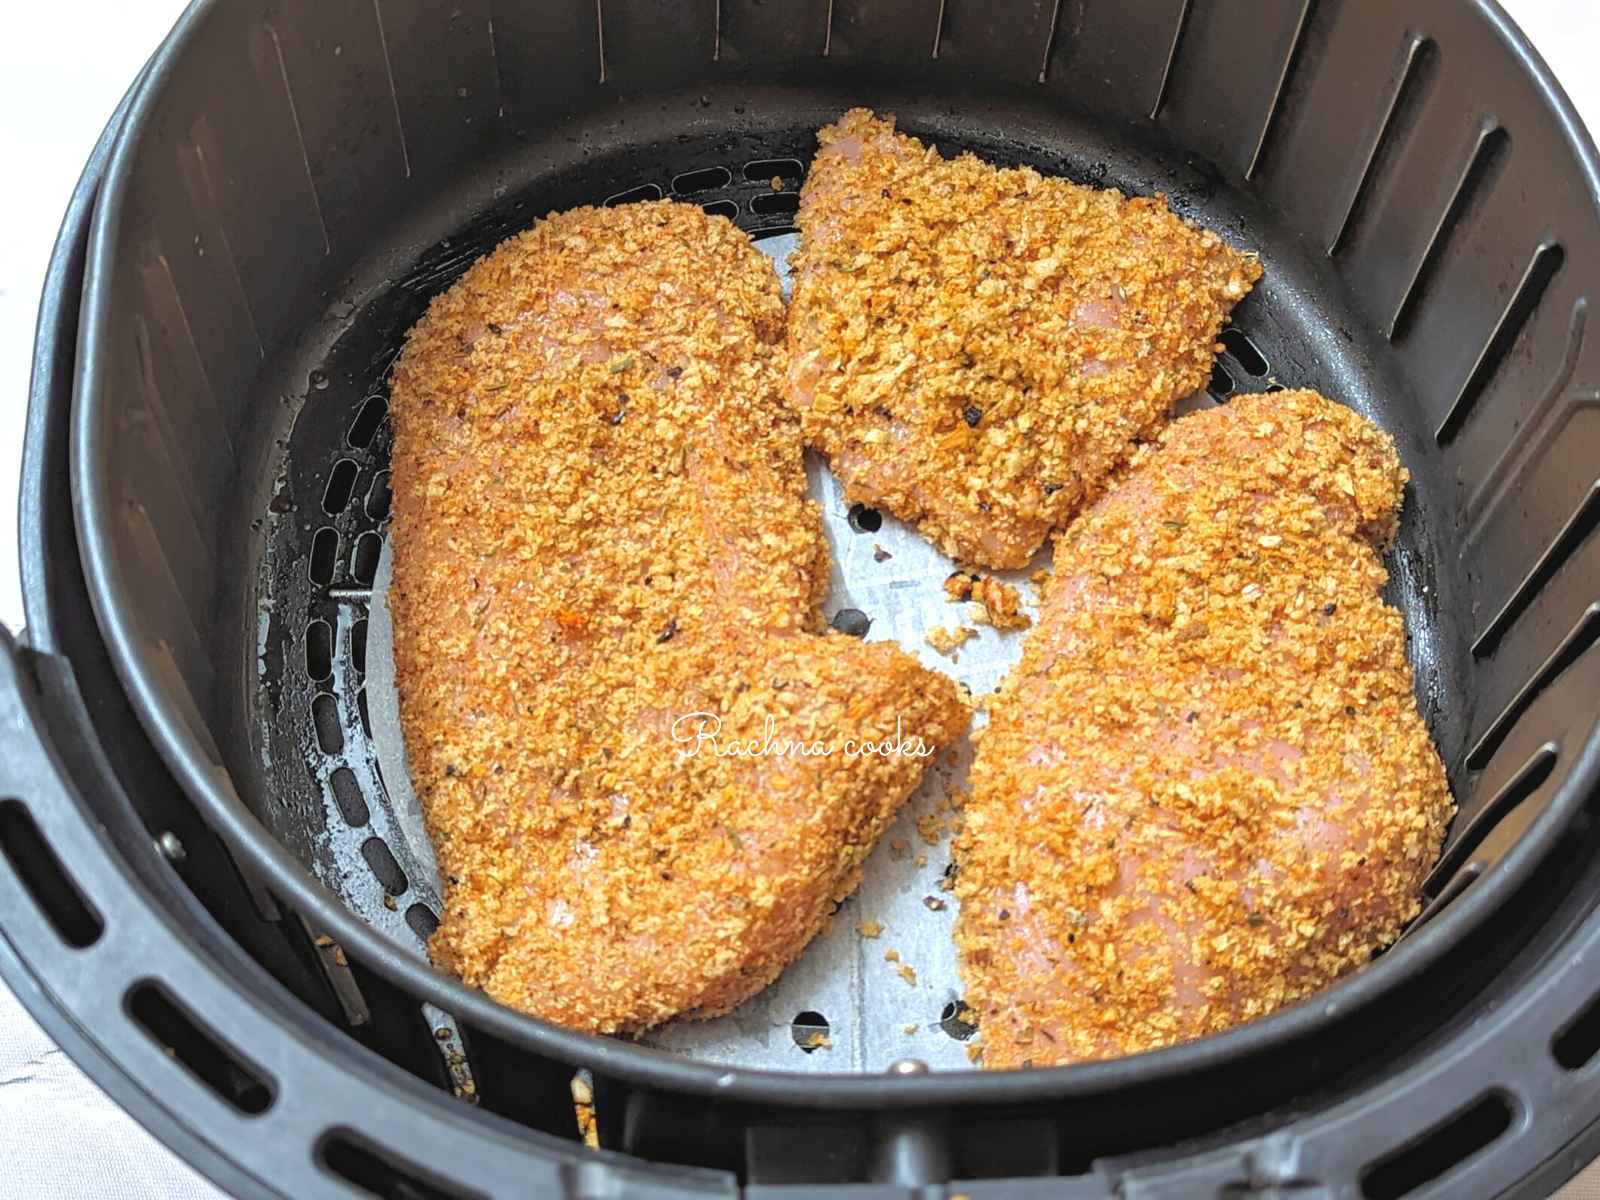 Breaded shake and bake breasts placed jn air fryer basket.